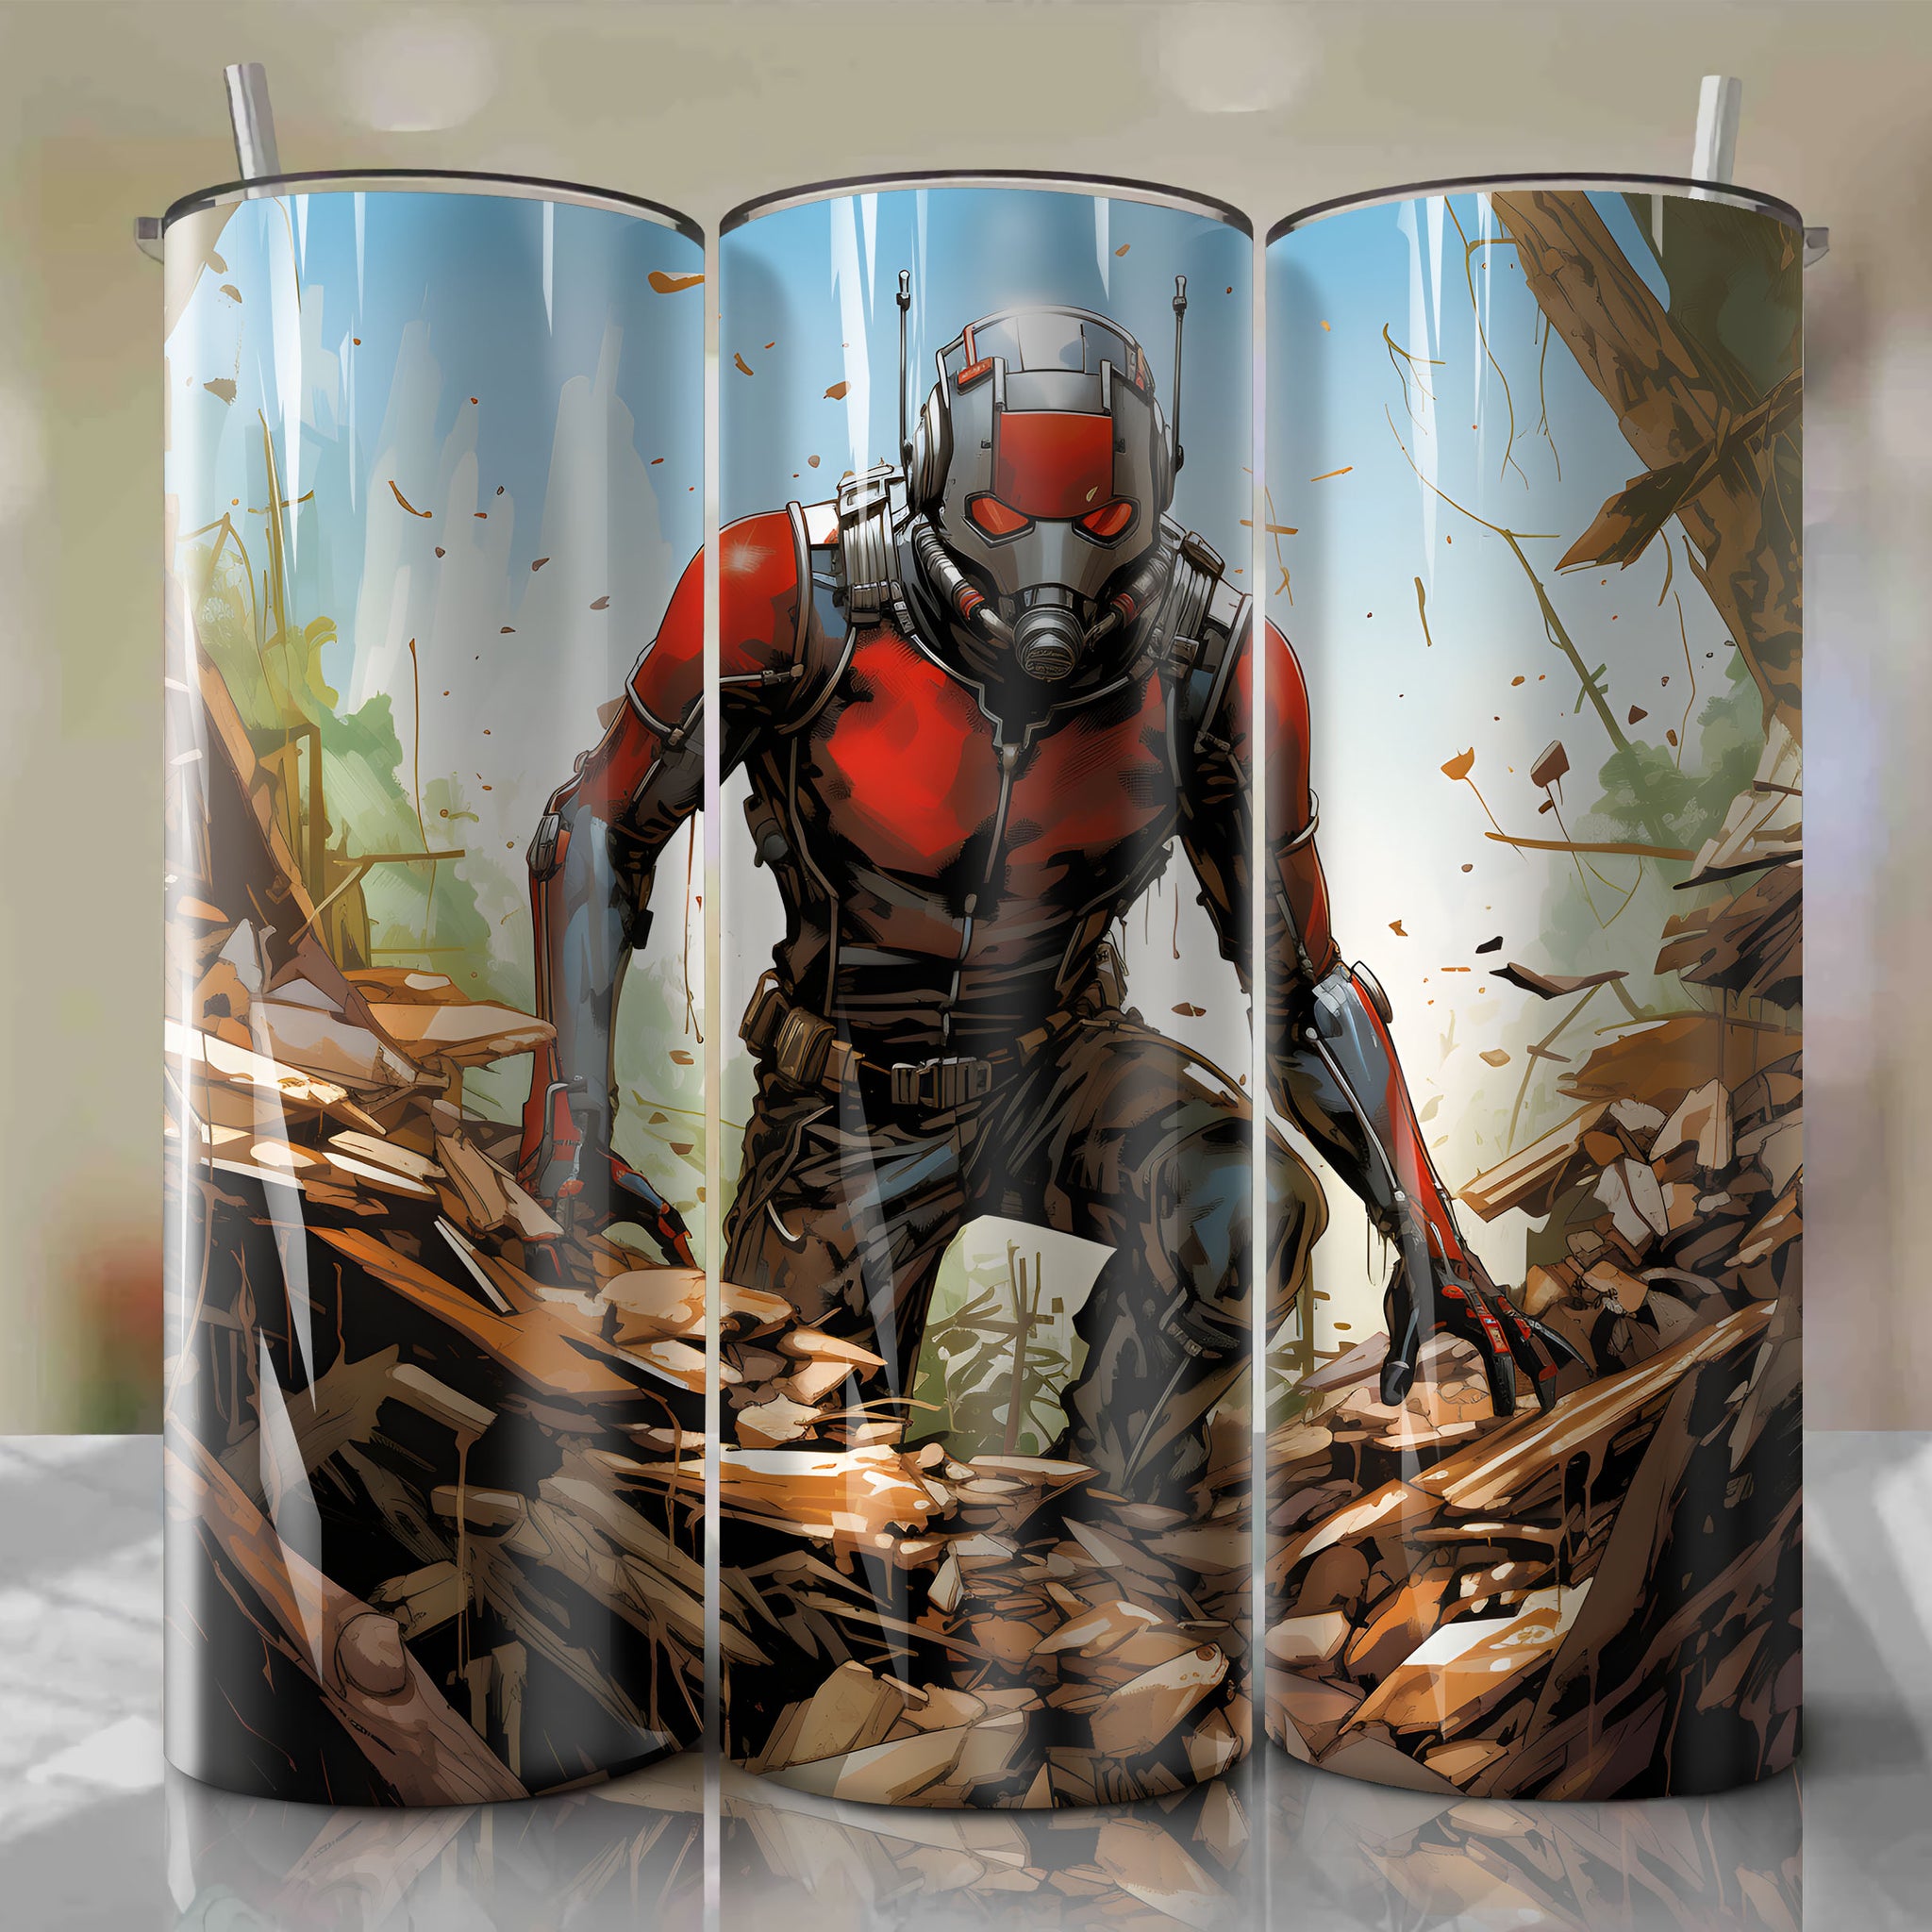 20 Oz Tumbler Wrap - Ant-Man emerges from an ant hill in stunning comic book art style.
